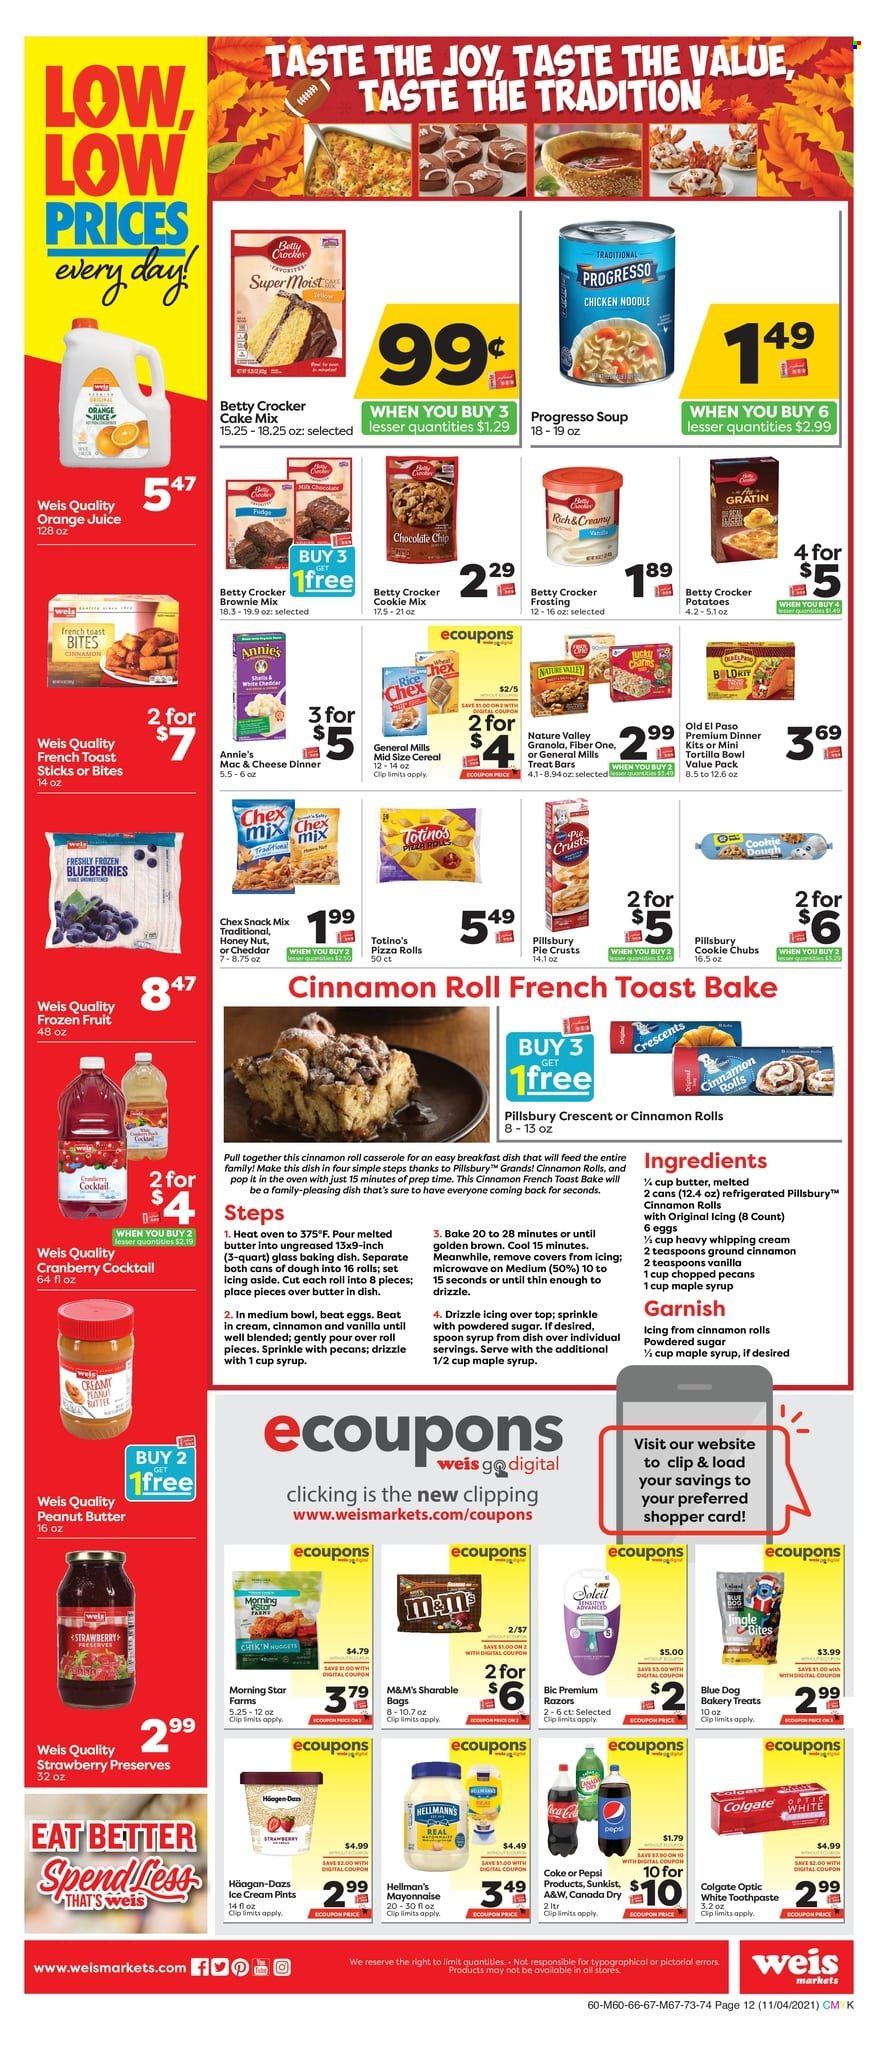 thumbnail - Weis Flyer - 11/04/2021 - 12/02/2021 - Sales products - tortillas, pizza rolls, Old El Paso, cinnamon roll, brownie mix, cake mix, potatoes, pizza, Pillsbury, noodles, Progresso, Annie's, eggs, whipping cream, mayonnaise, cookie dough, snack, M&M's, Chex Mix, frosting, sugar, pie crust, icing sugar, cereals, granola, Nature Valley, Fiber One, rice, maple syrup, peanut butter, syrup, pecans, Canada Dry, Coca-Cola, Pepsi, orange juice, juice, A&W, Colgate, toothpaste, Sure, BIC, spoon, casserole. Page 12.